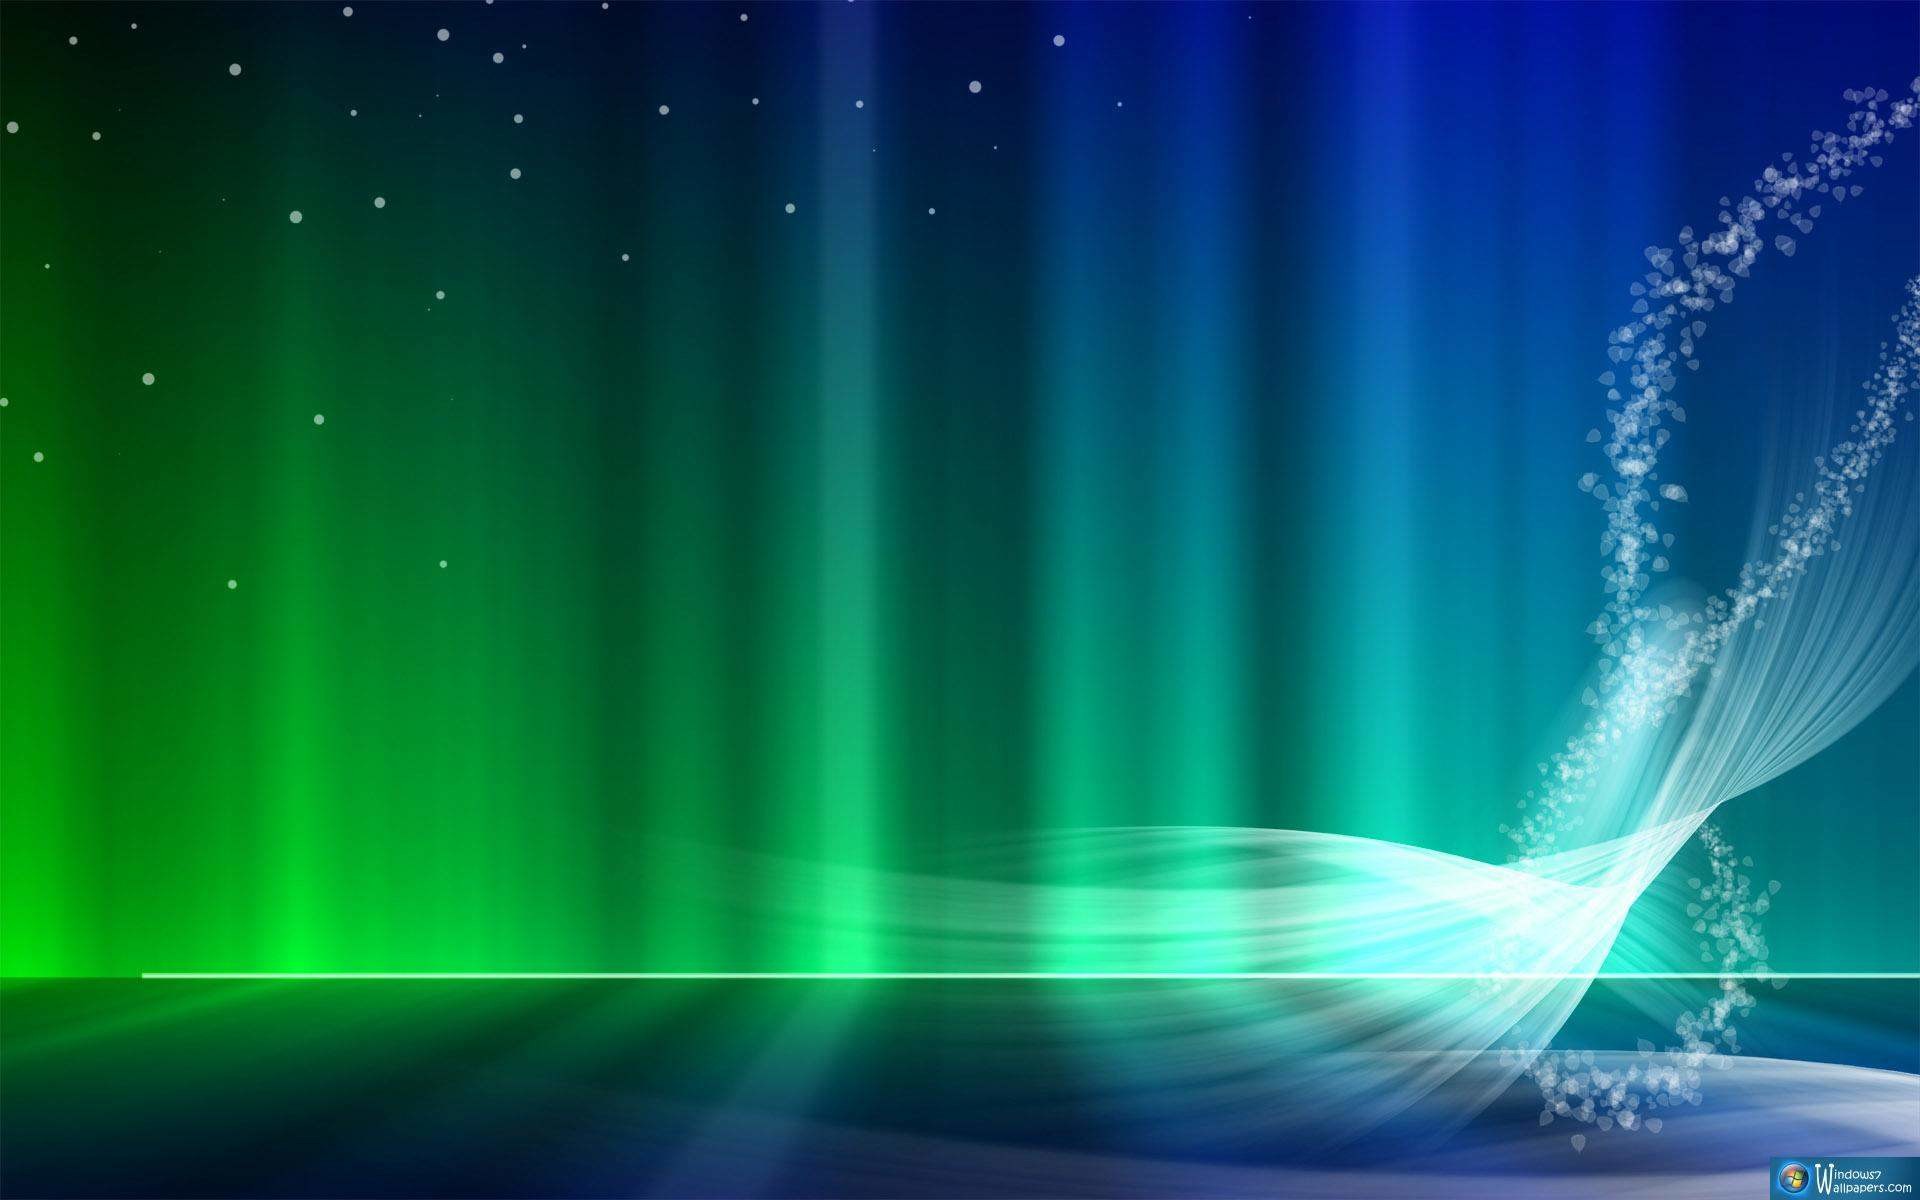 Free Wallpapers Free Widescreen Wallpapers For Windows Live Wallpapers Windows 8 Wallpapers